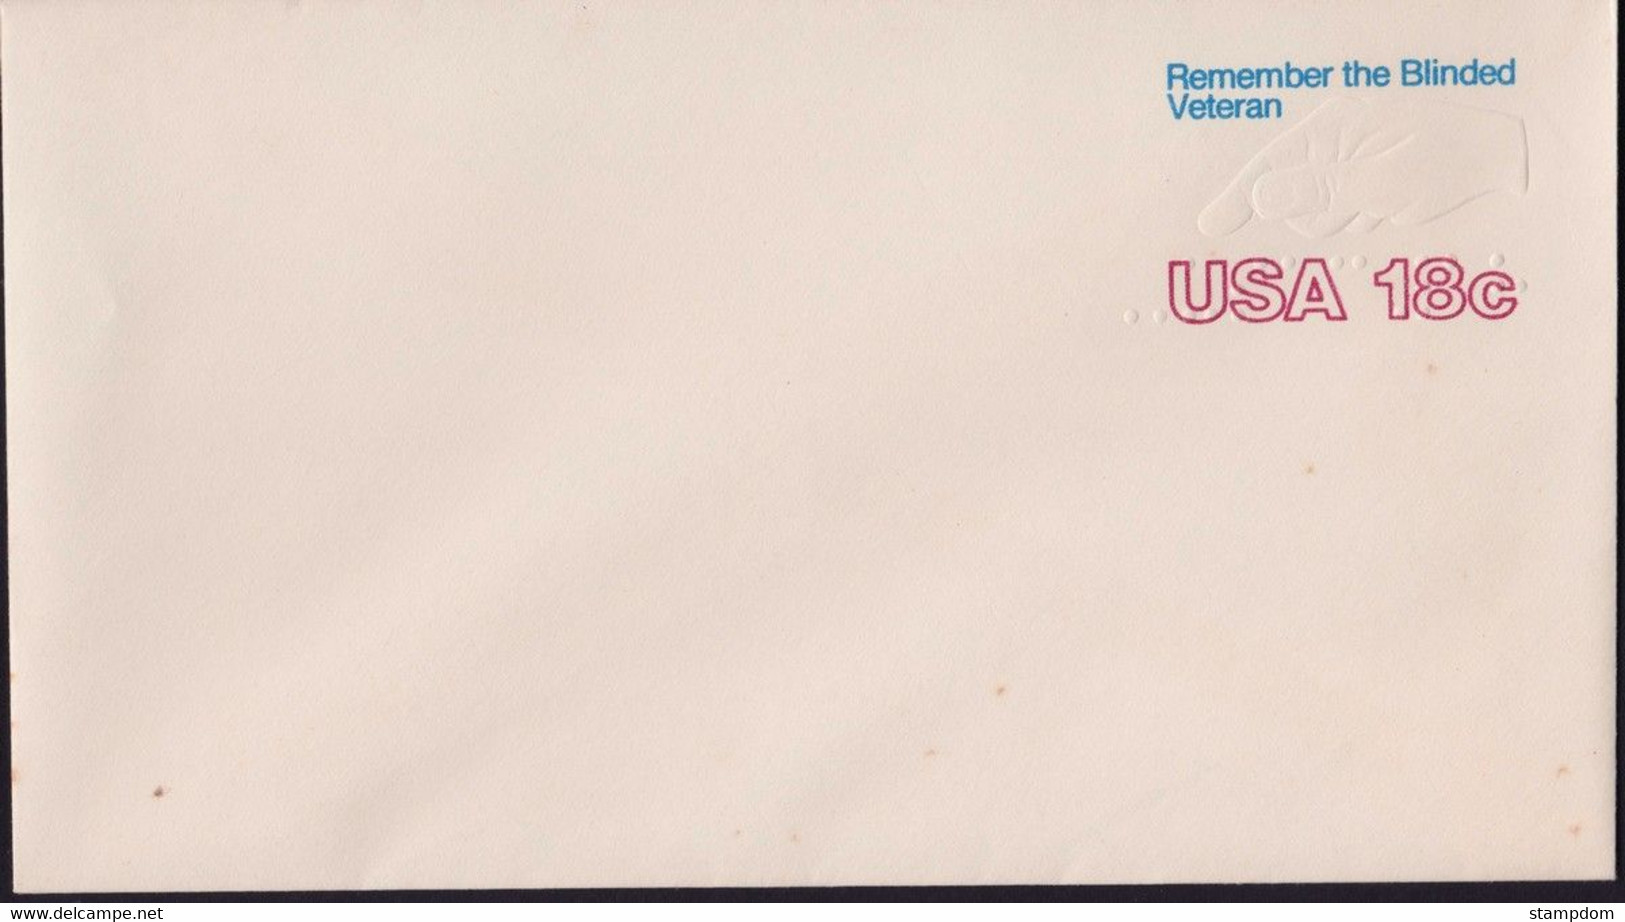 USA 18c "Remember The Blinded Veteran" PSE - UNUSED @D4838 - 1981-00